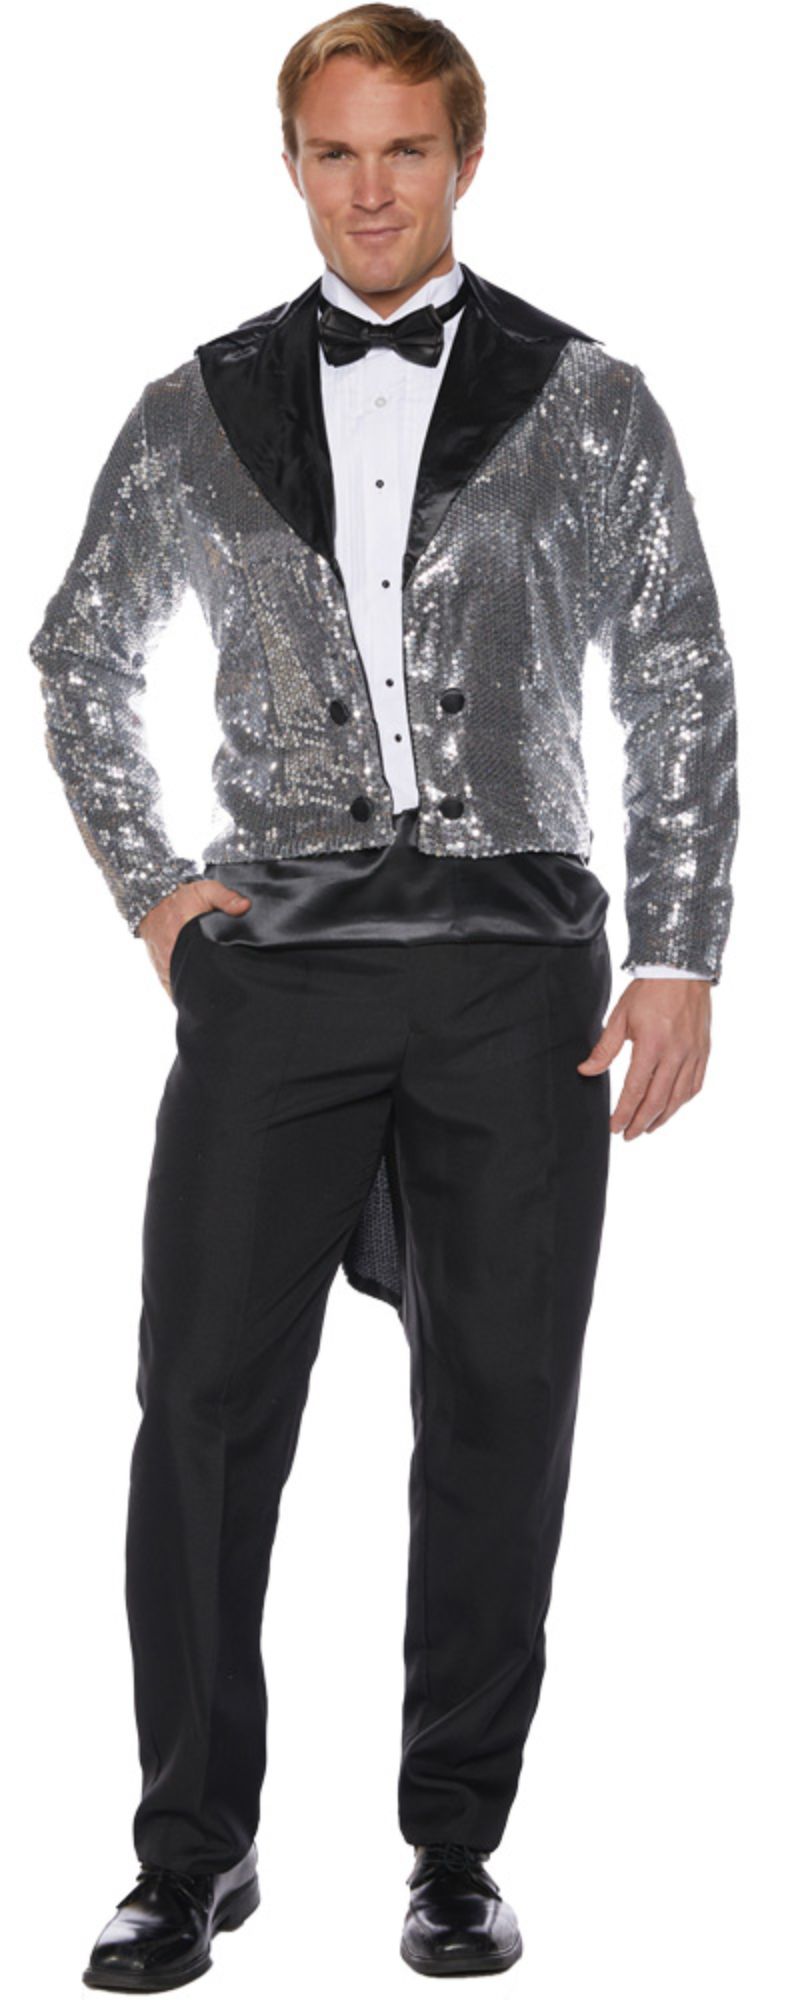 The Costume Center Silver Sequin Tailcoat Men Adult Halloween Costume - One Size